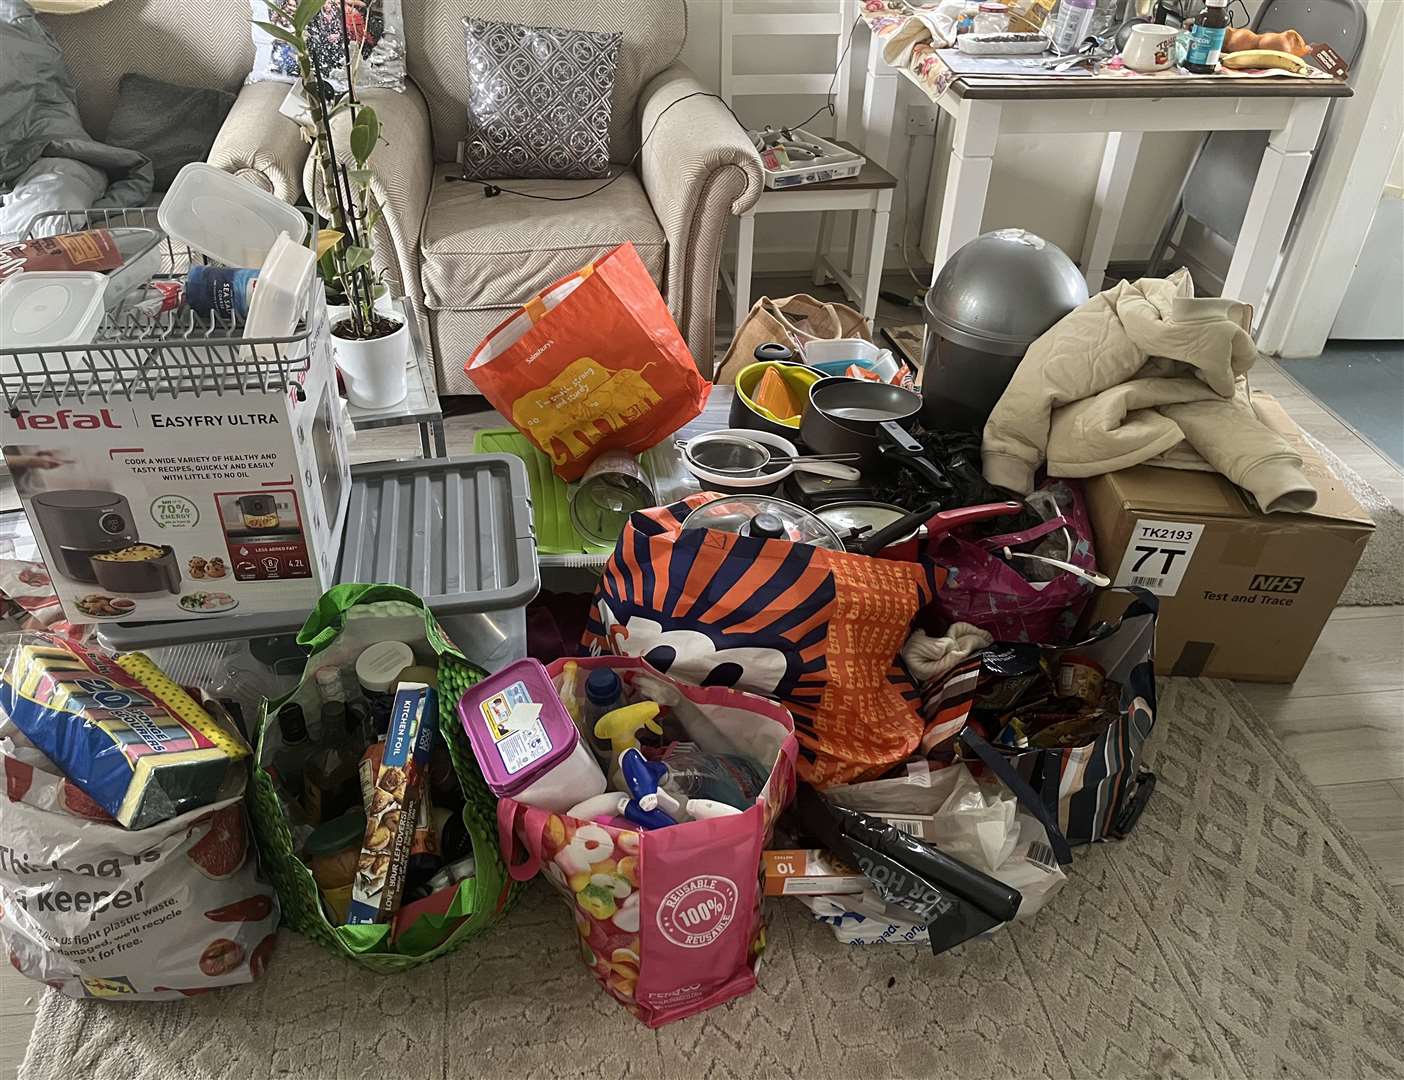 The contents of Barbara Hasiuk’s kitchen cupboards have been piled on her living room floor for three months